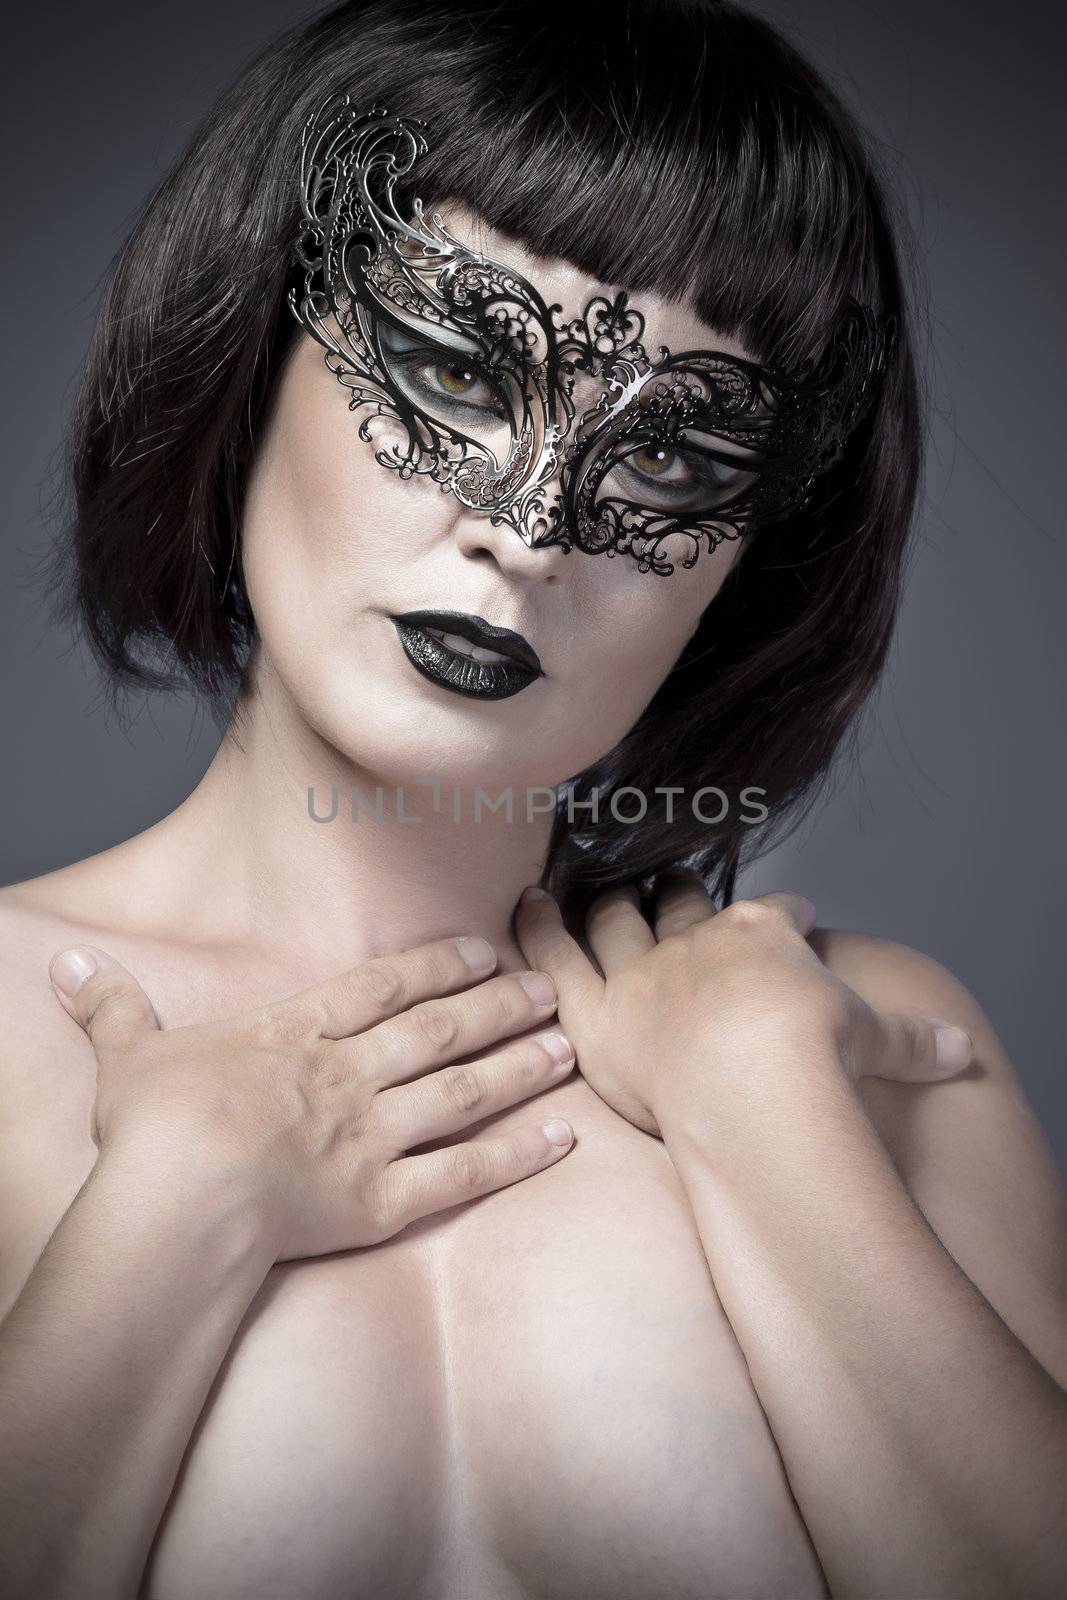 Nude woman, beautiful young in a black mysterious venetian mask by FernandoCortes